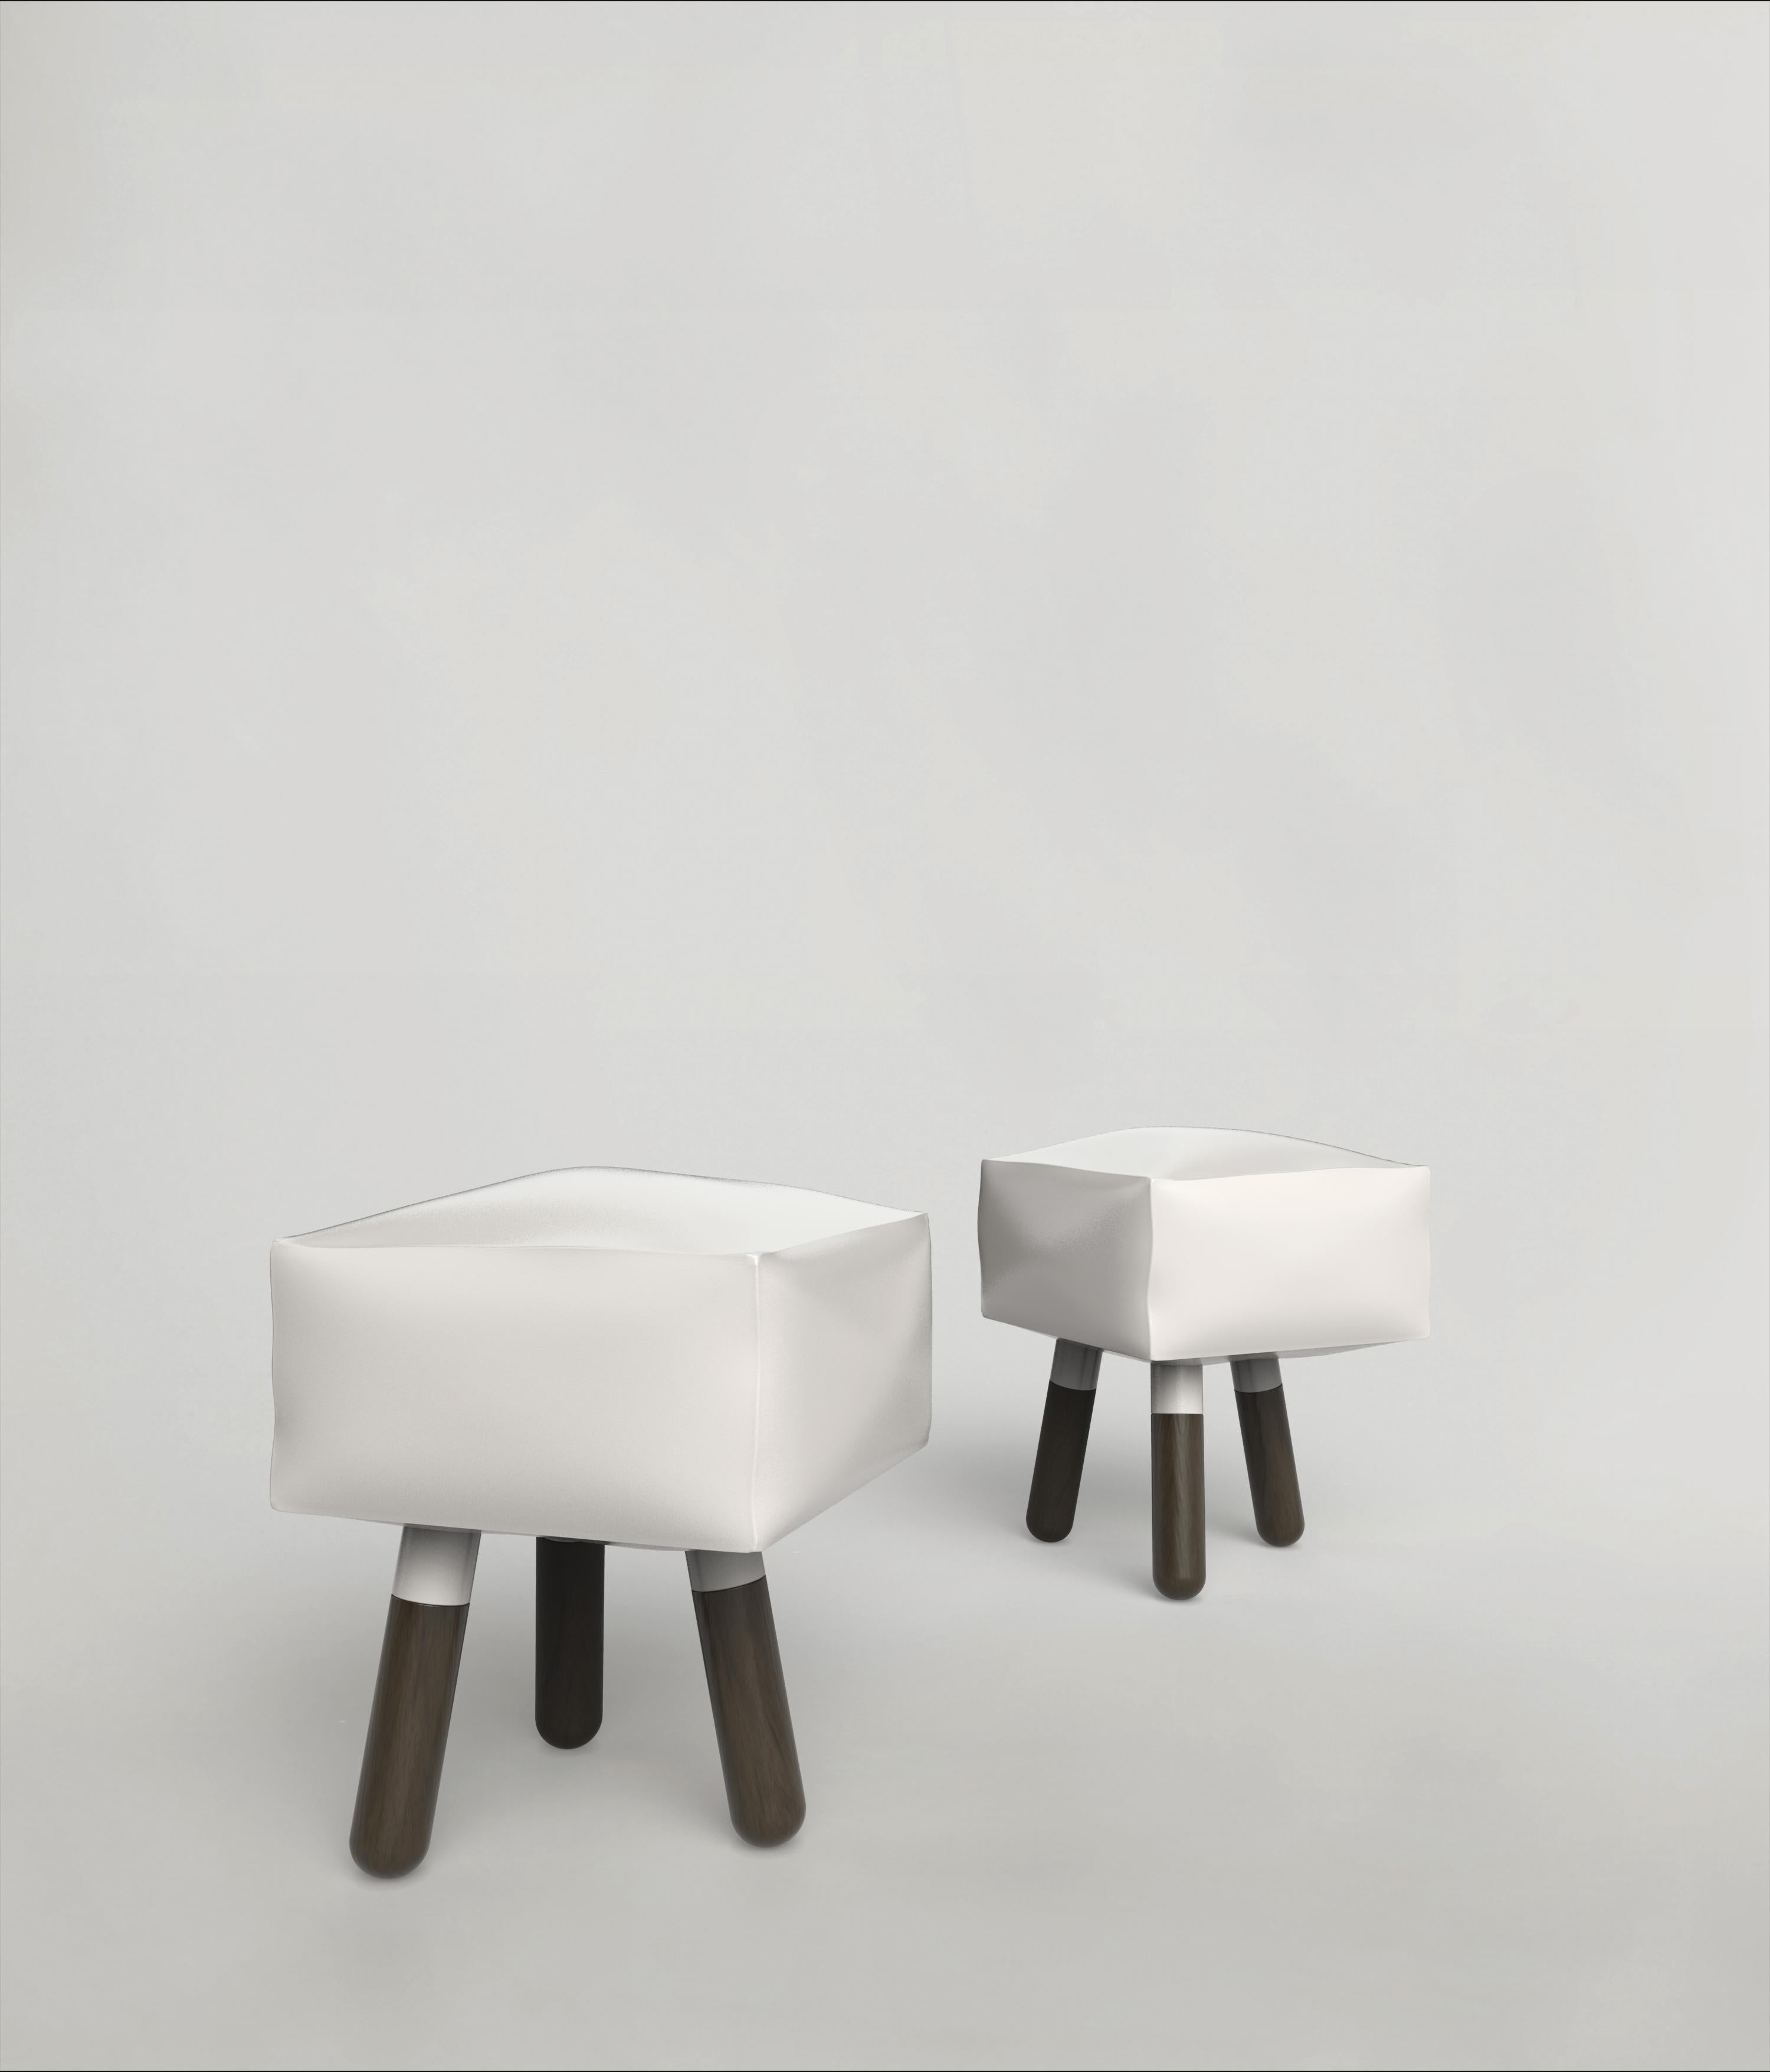 Set of 2 Icenine V2 stools by Edizione Limitata
Limited edition of 15+3 AP. Signed and numbered.
Dimensions: D35 x W35 x H41 cm
Materials: polished painted brass+ dark oak solid wood

This 21st century brass stool is a product of Italian